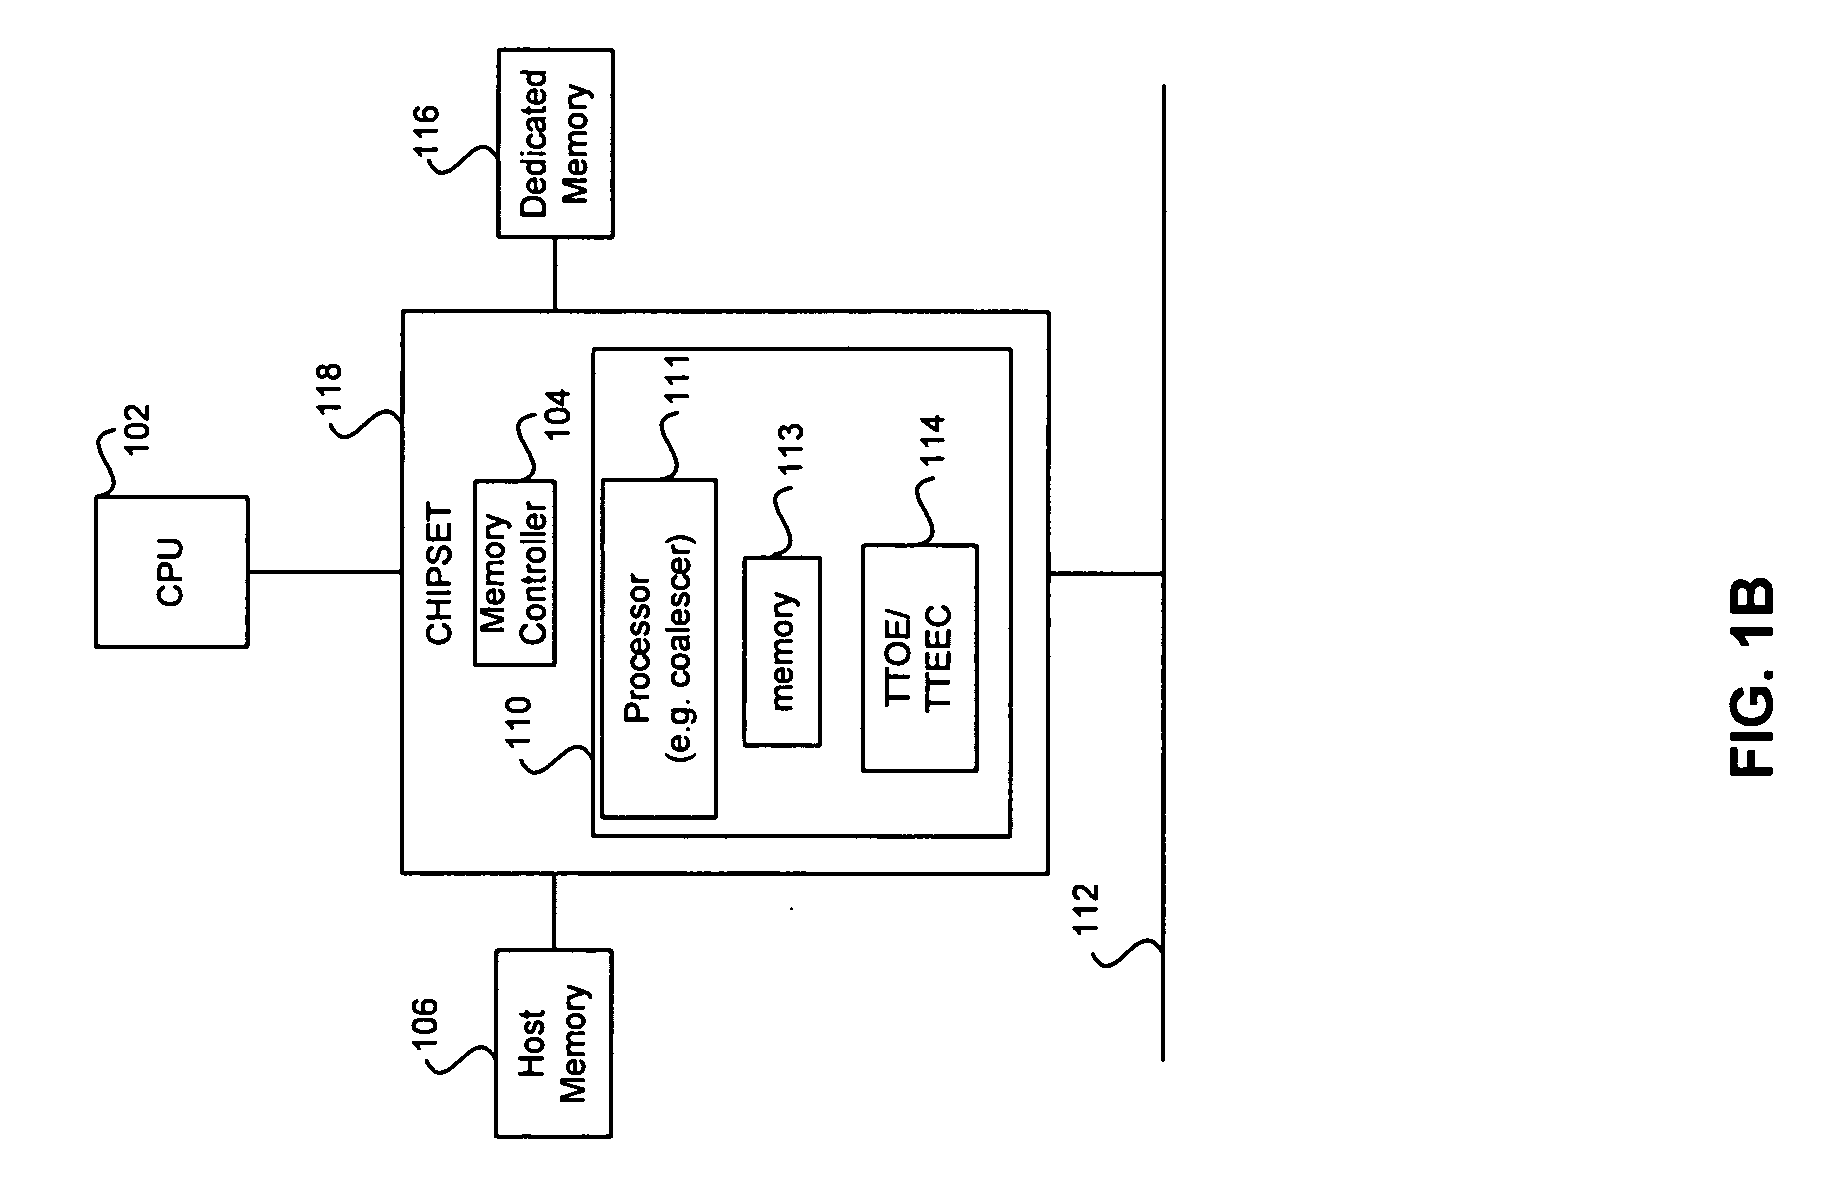 Method and system for transparent TCP offload (TTO) with a user space library